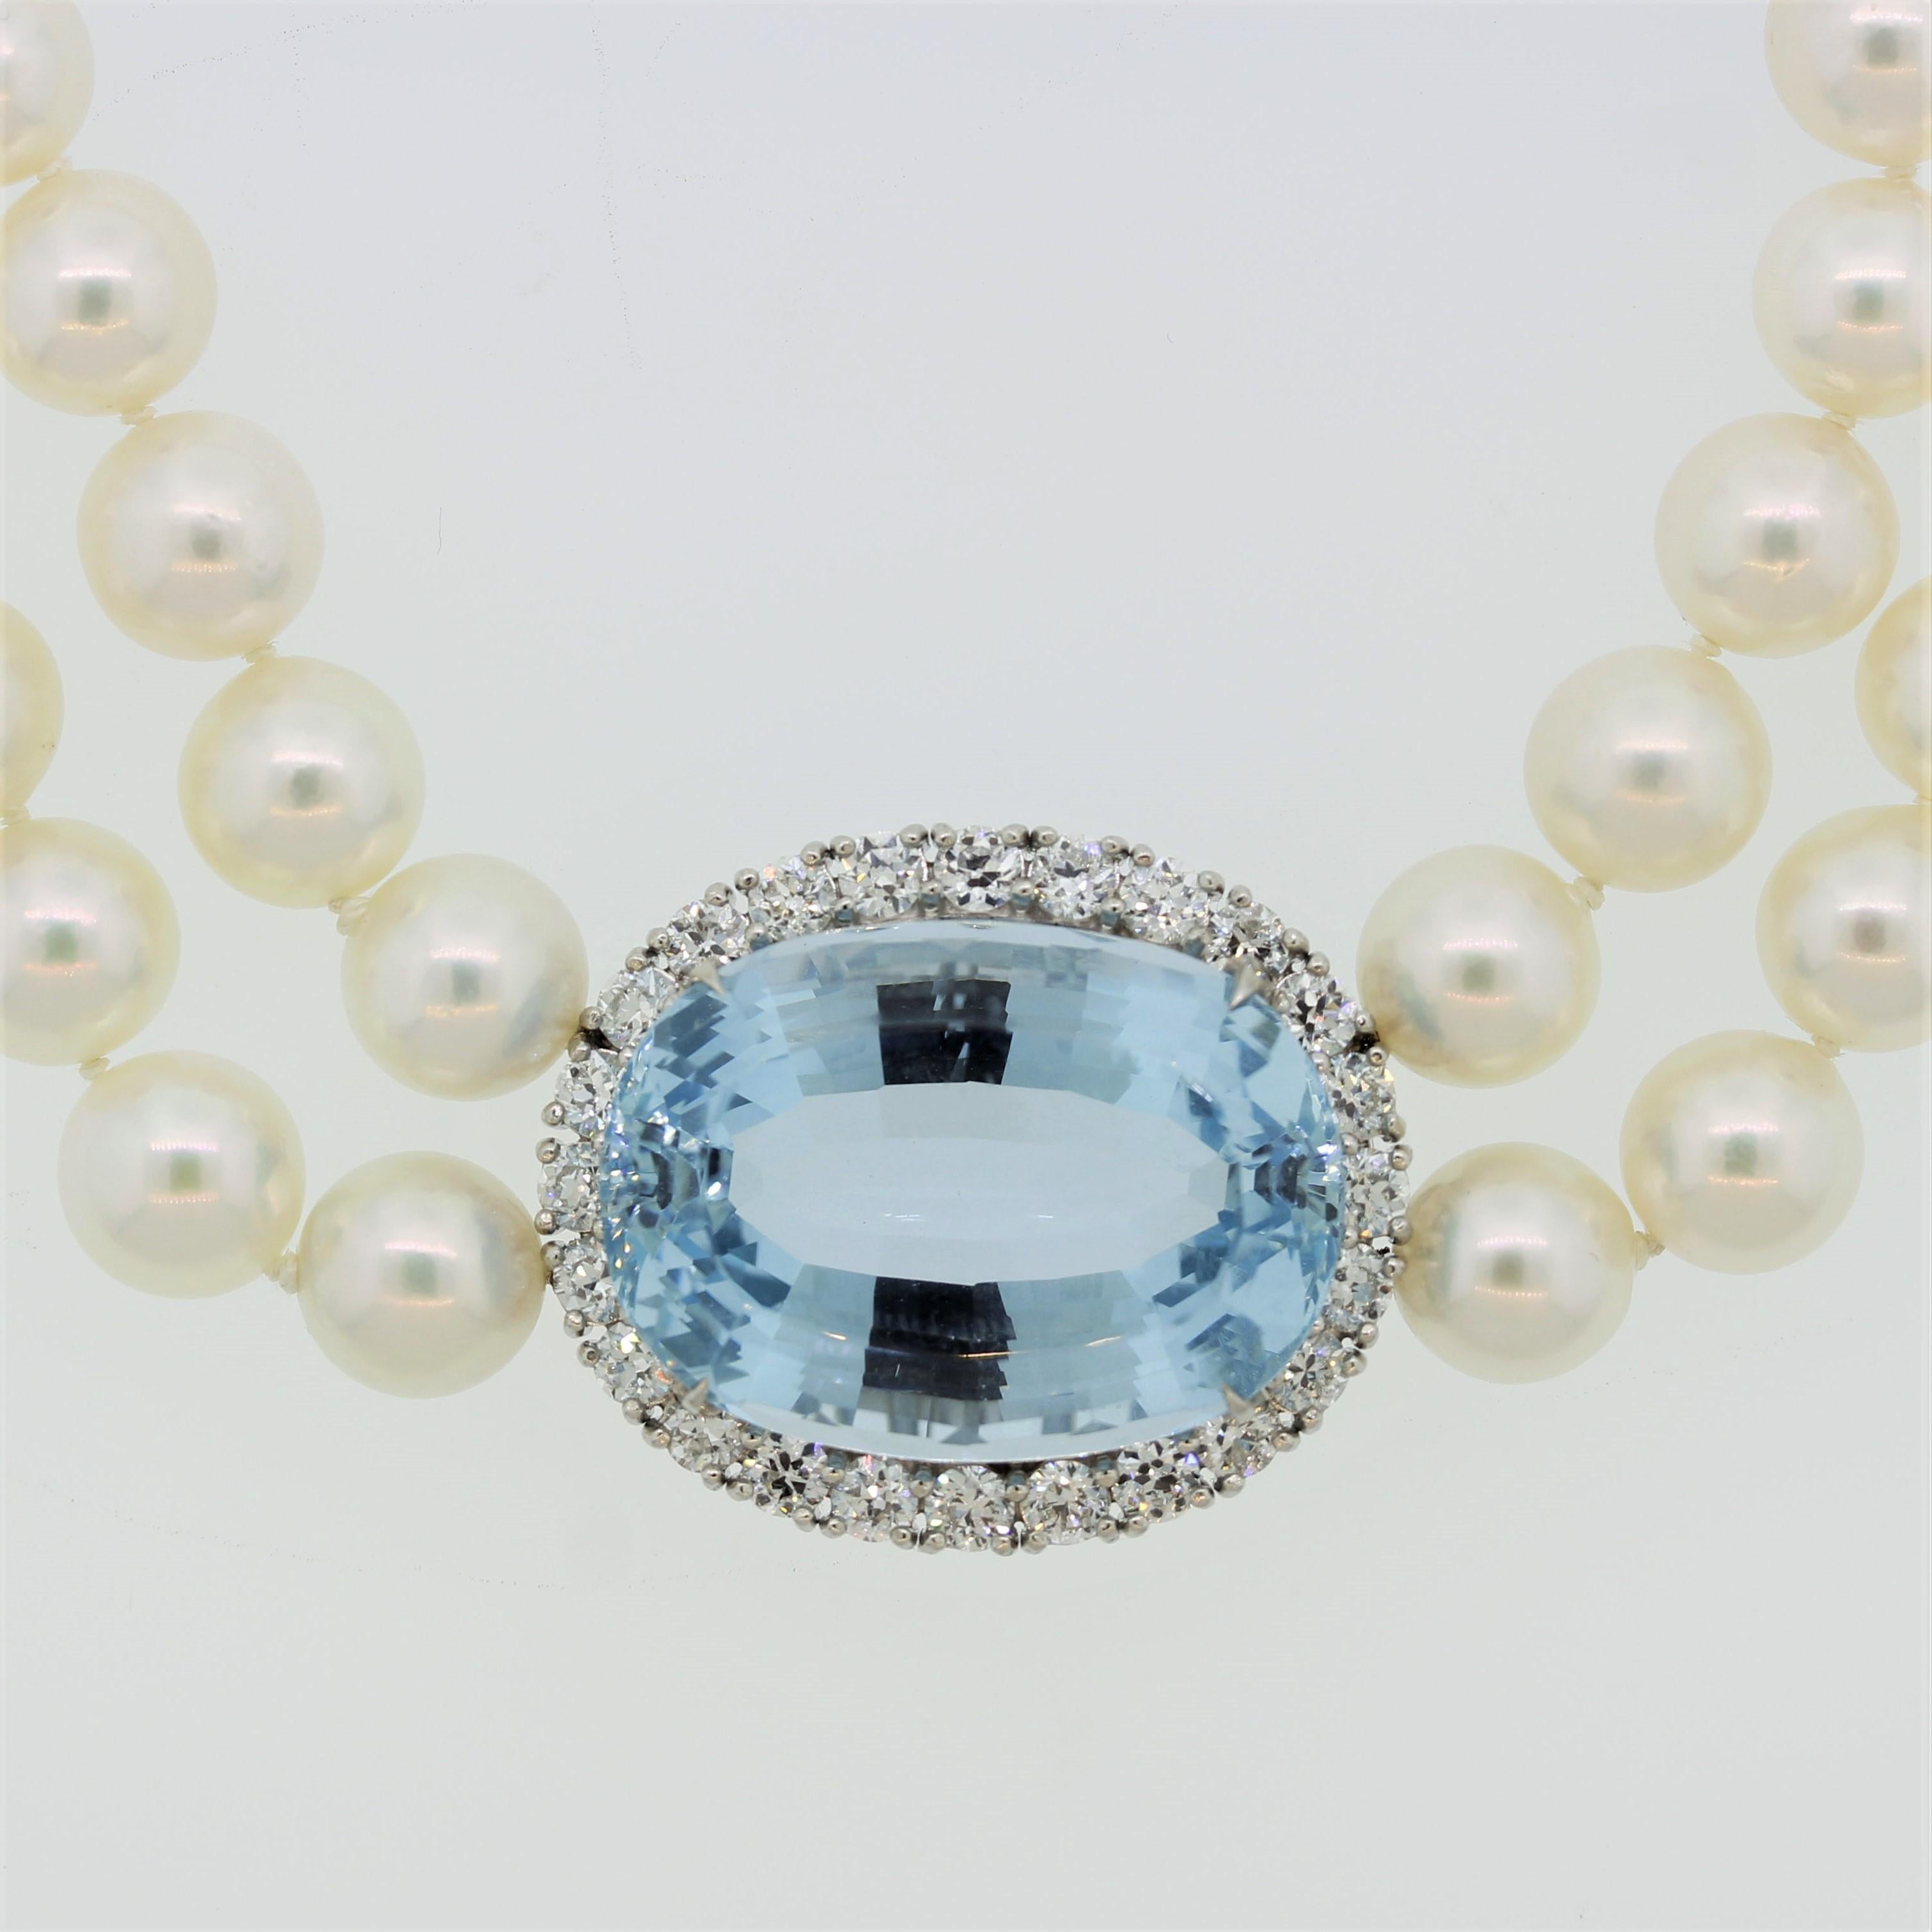 A stunning piece featuring a stunning oval-shaped aquamarine weighing 48.72 carats. It has the ideal bright sea-blue color and is free of any inclusions allowing the stones natural brilliance to shine. It is surrounded by 0.63 carats of larger round